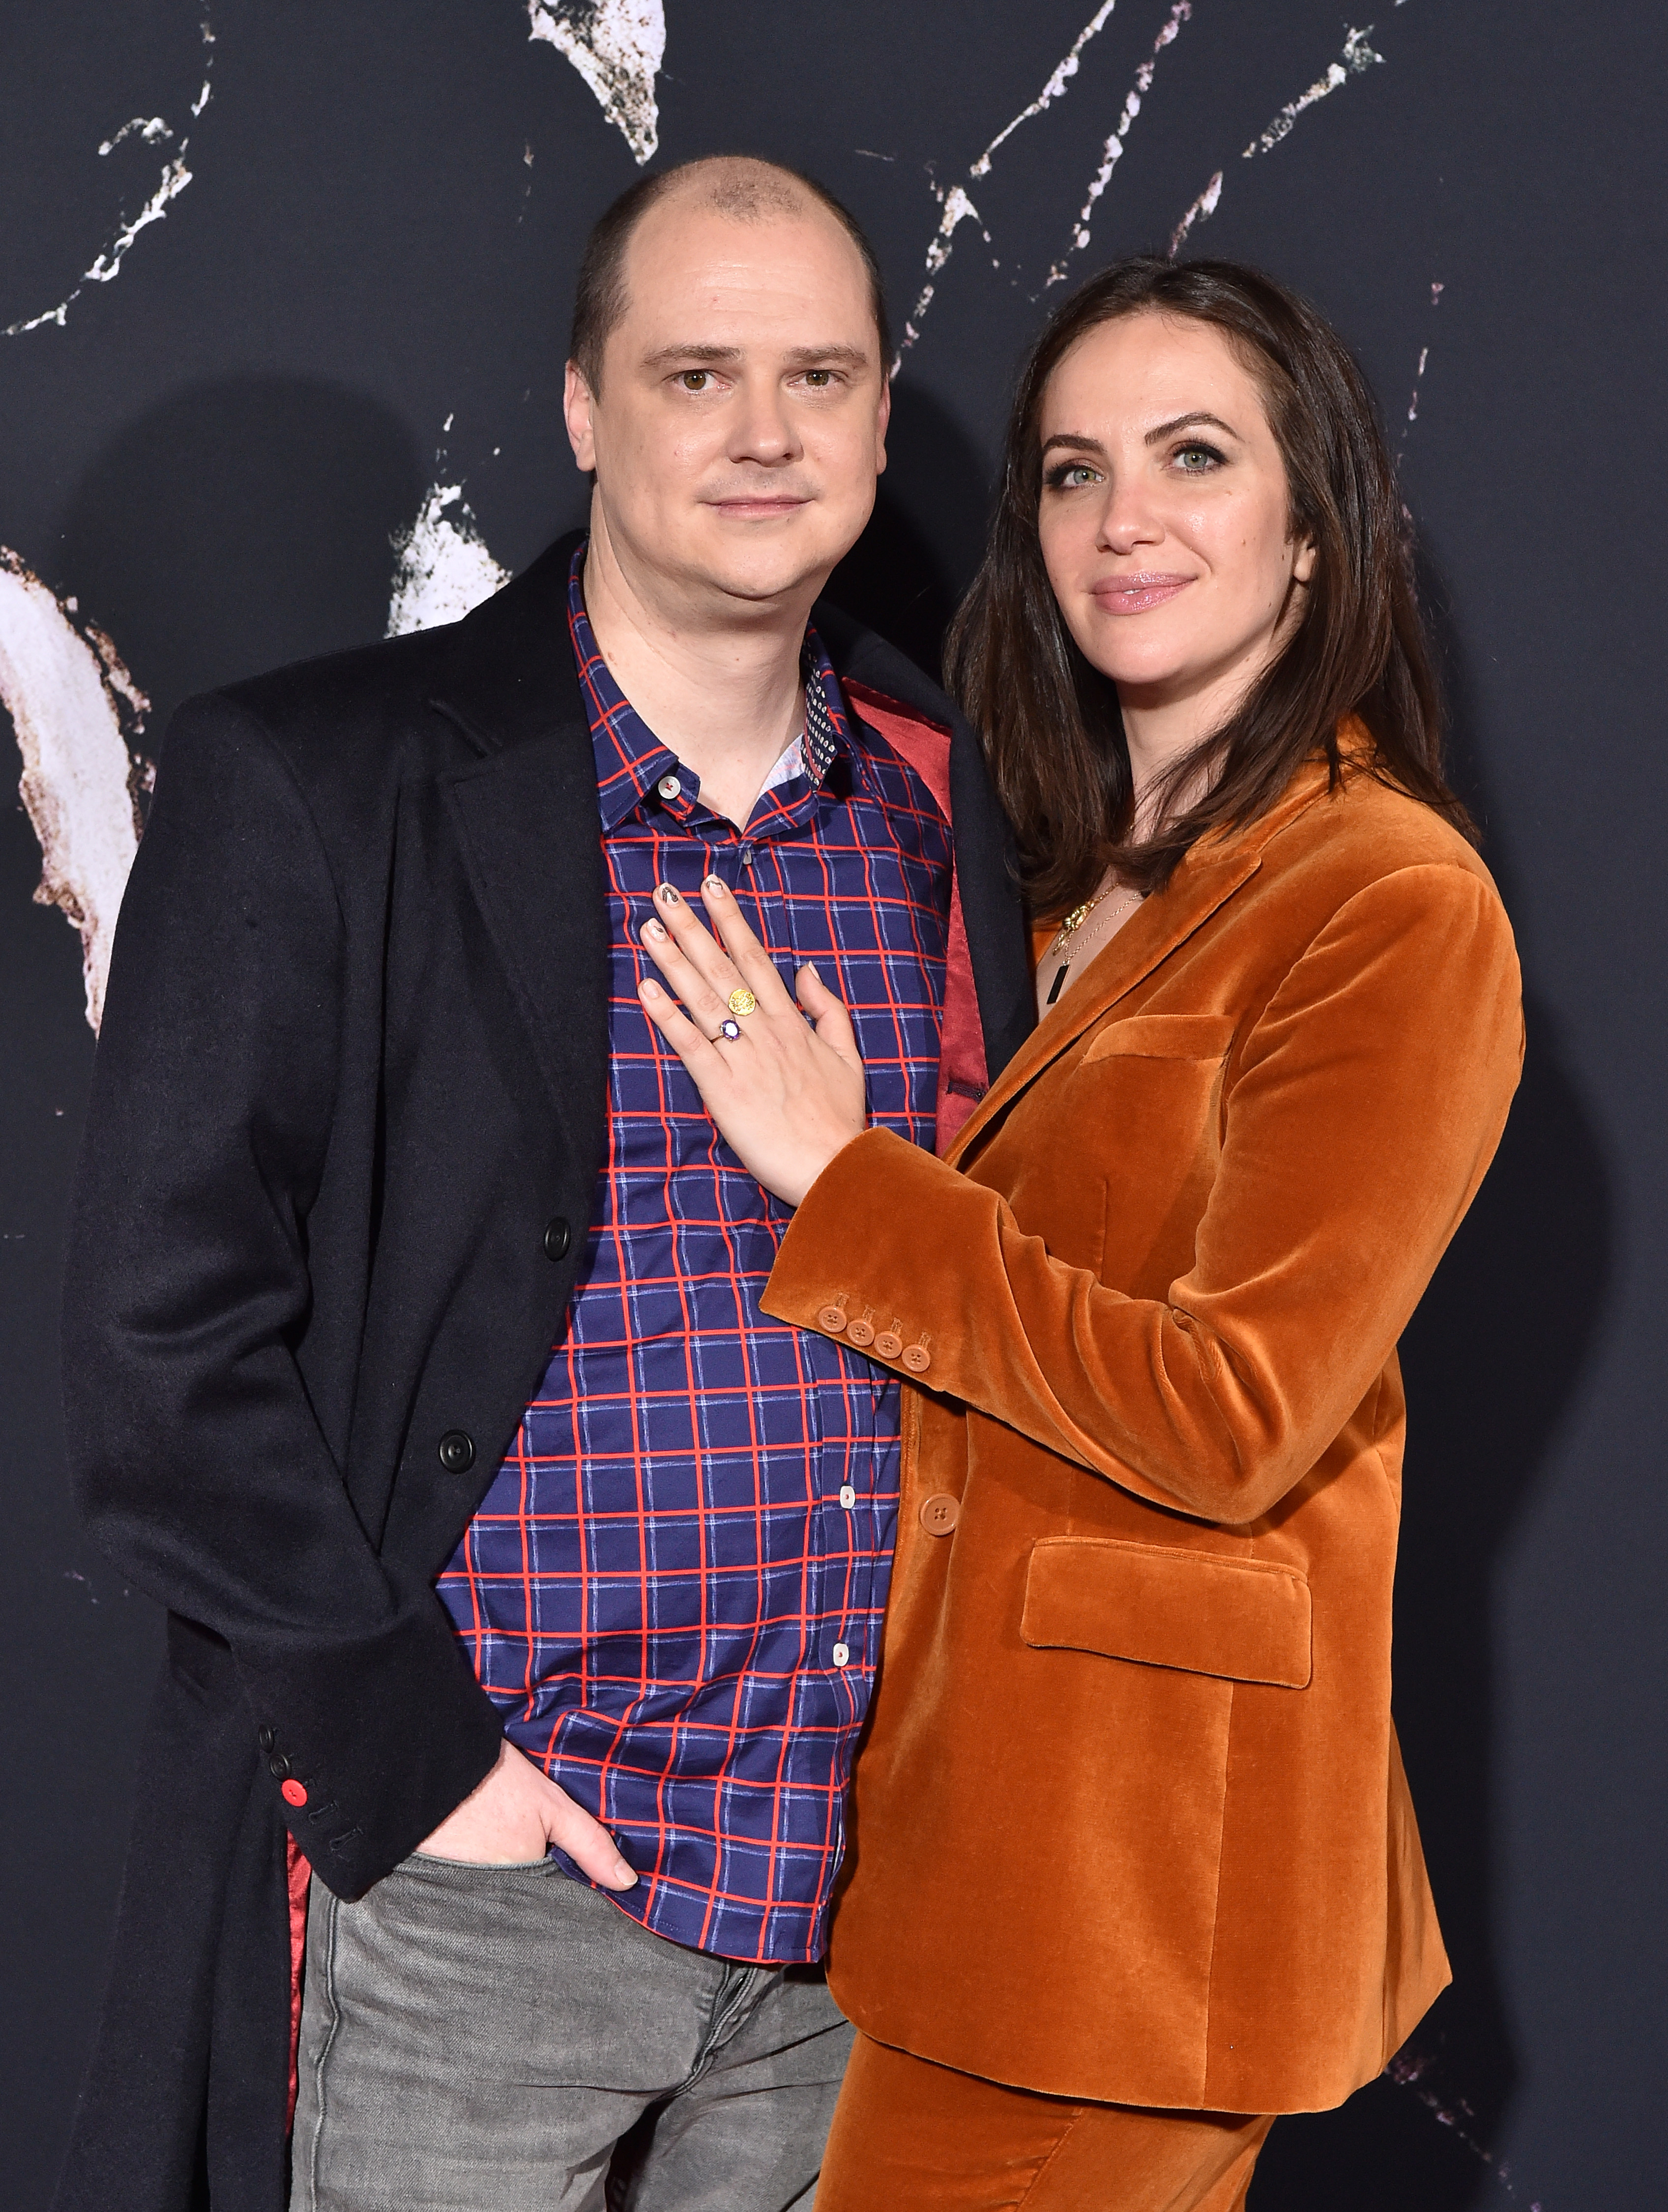 Mike Flanagan and Kate Siegel attend the Warner Bros Pictures' premiere of "Doctor Sleep" at Westwood Regency Theater on October 29, 2019, in Los Angeles, California. | Source: Getty Images